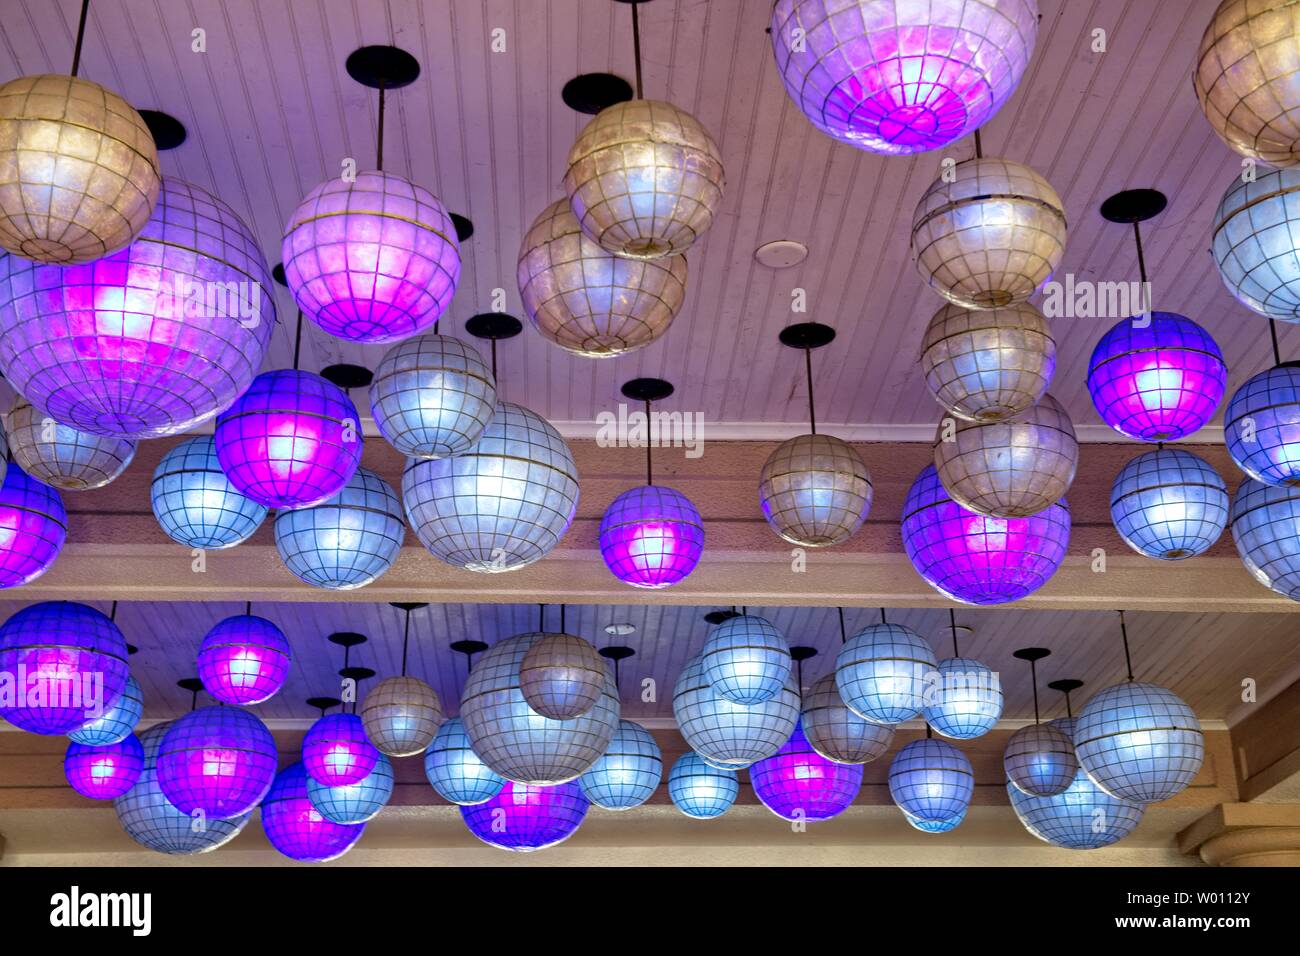 Mirrored balls hang from the ceiling as light fixtures Stock Photo